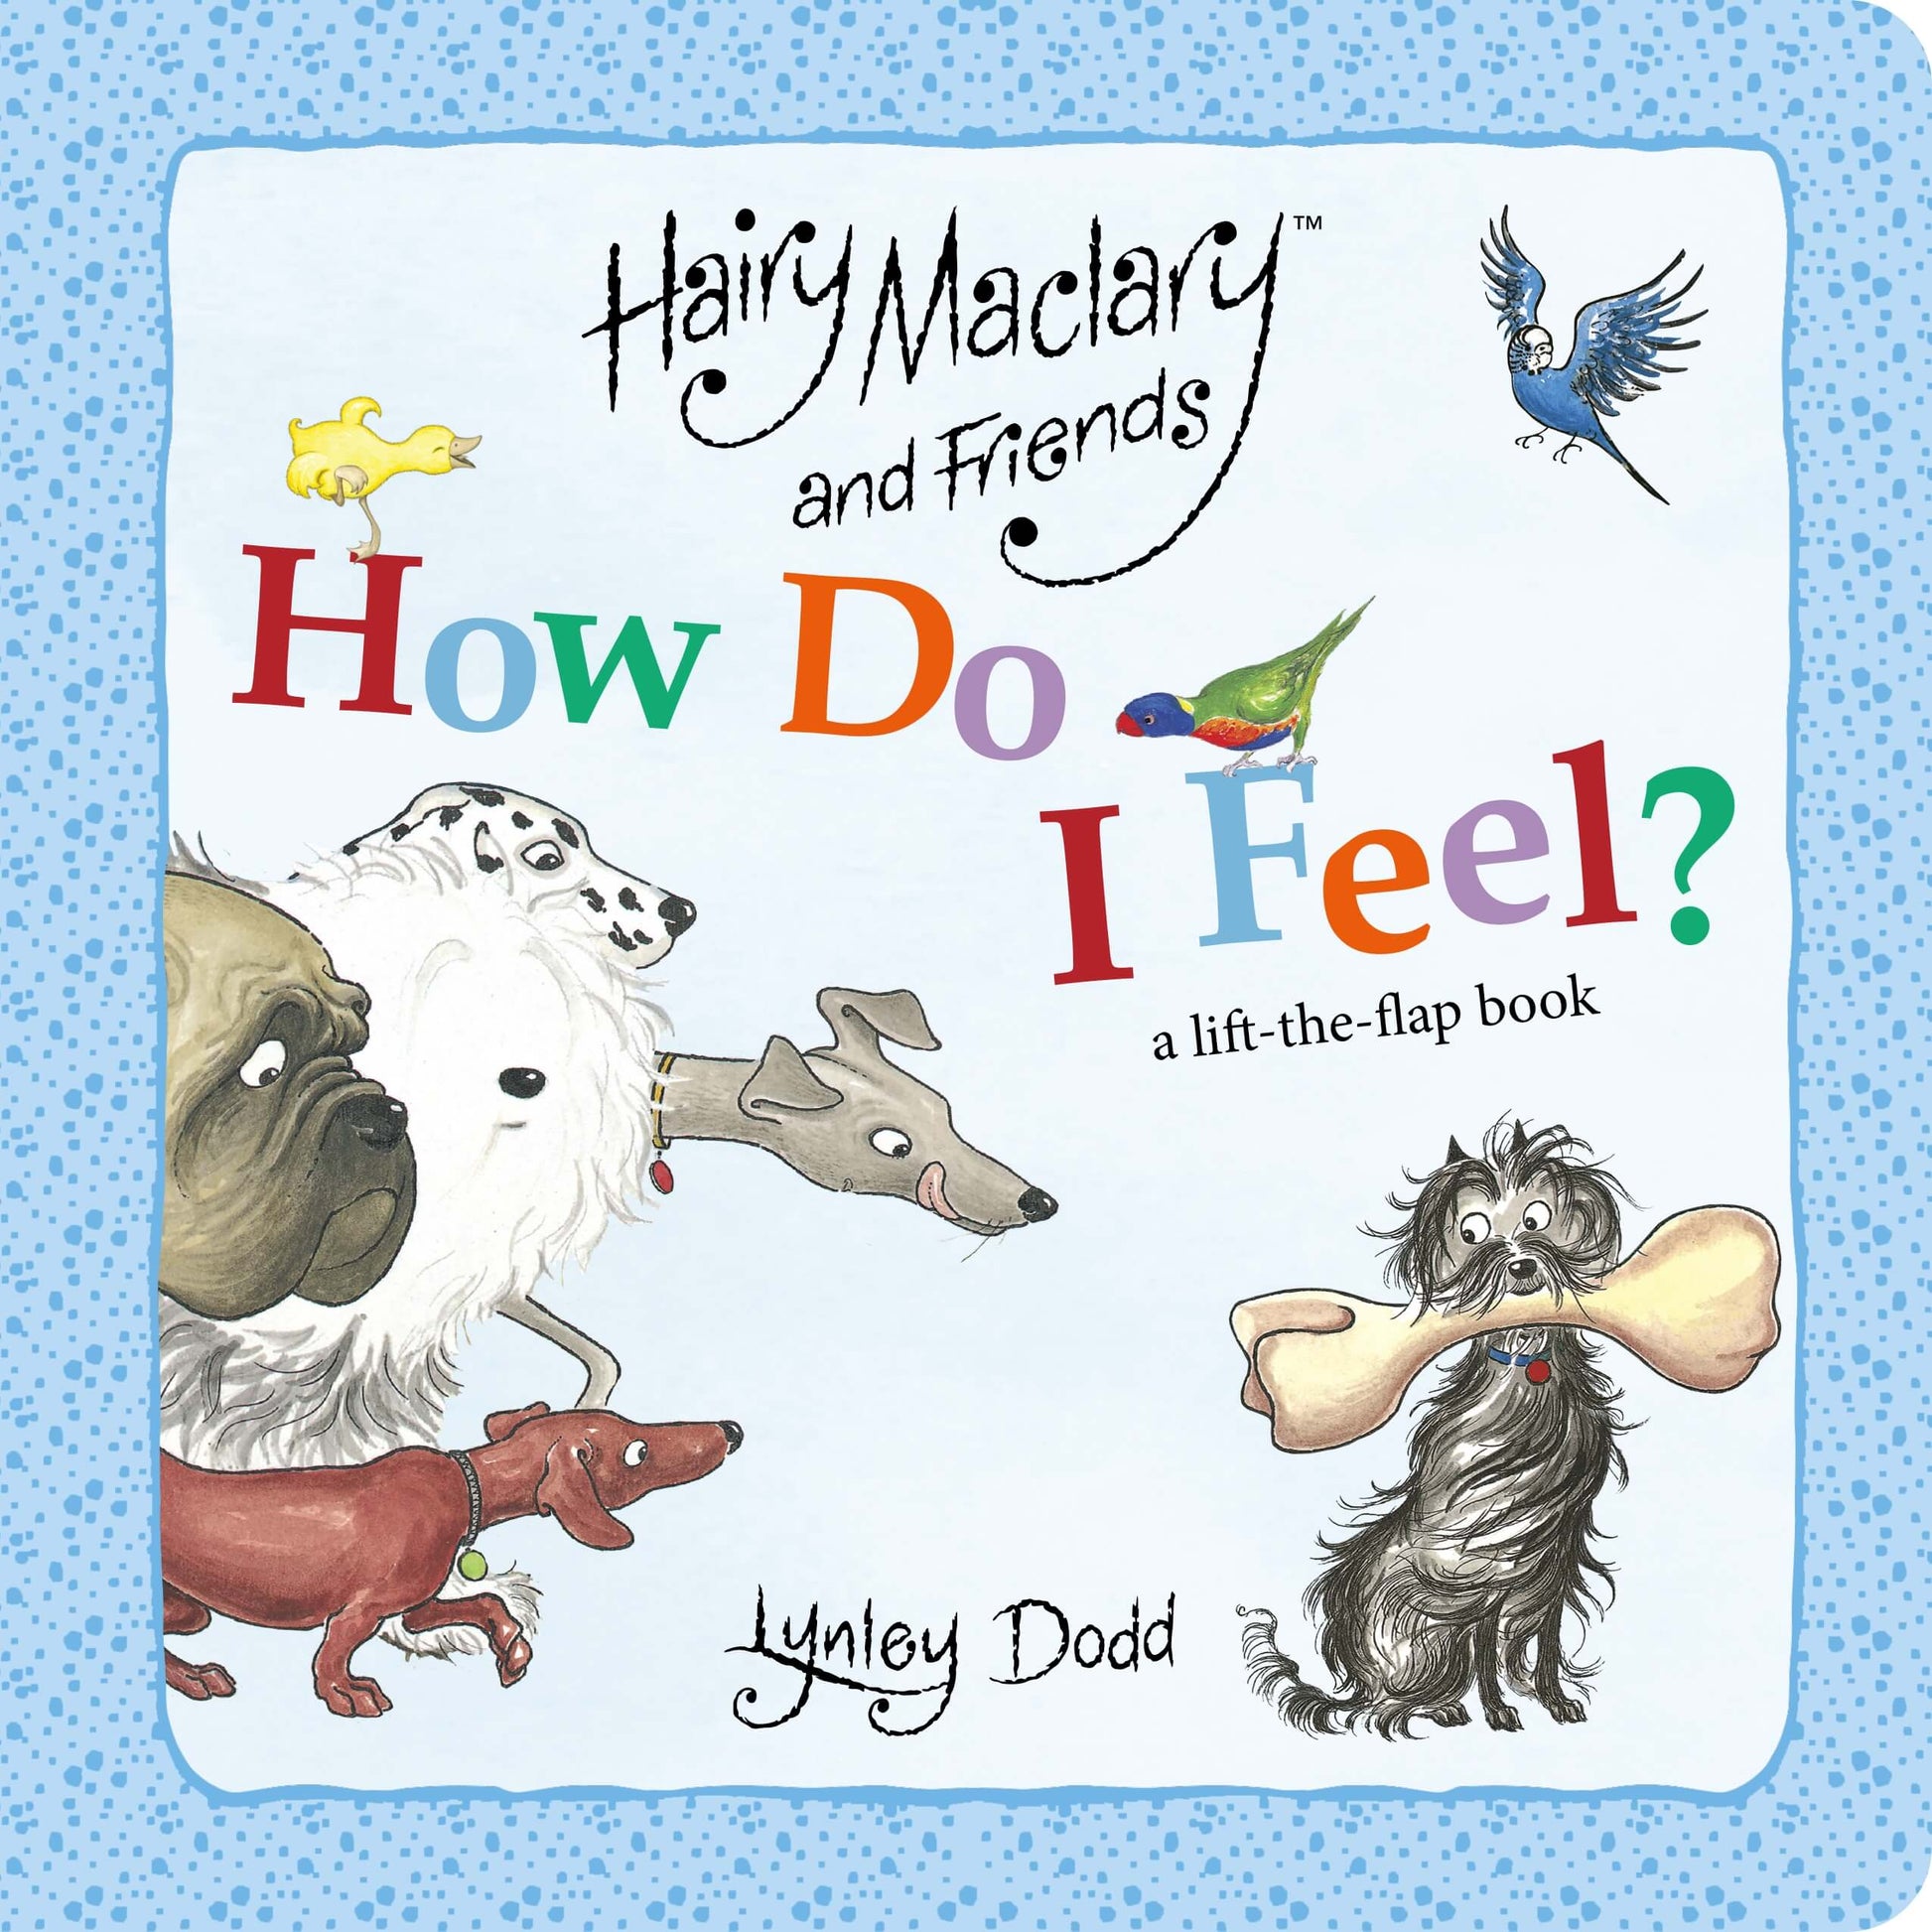 Hairy Maclary and Friends How Do I Feel? by Lynley Dodd from Penguin Books available at Bear & Moo